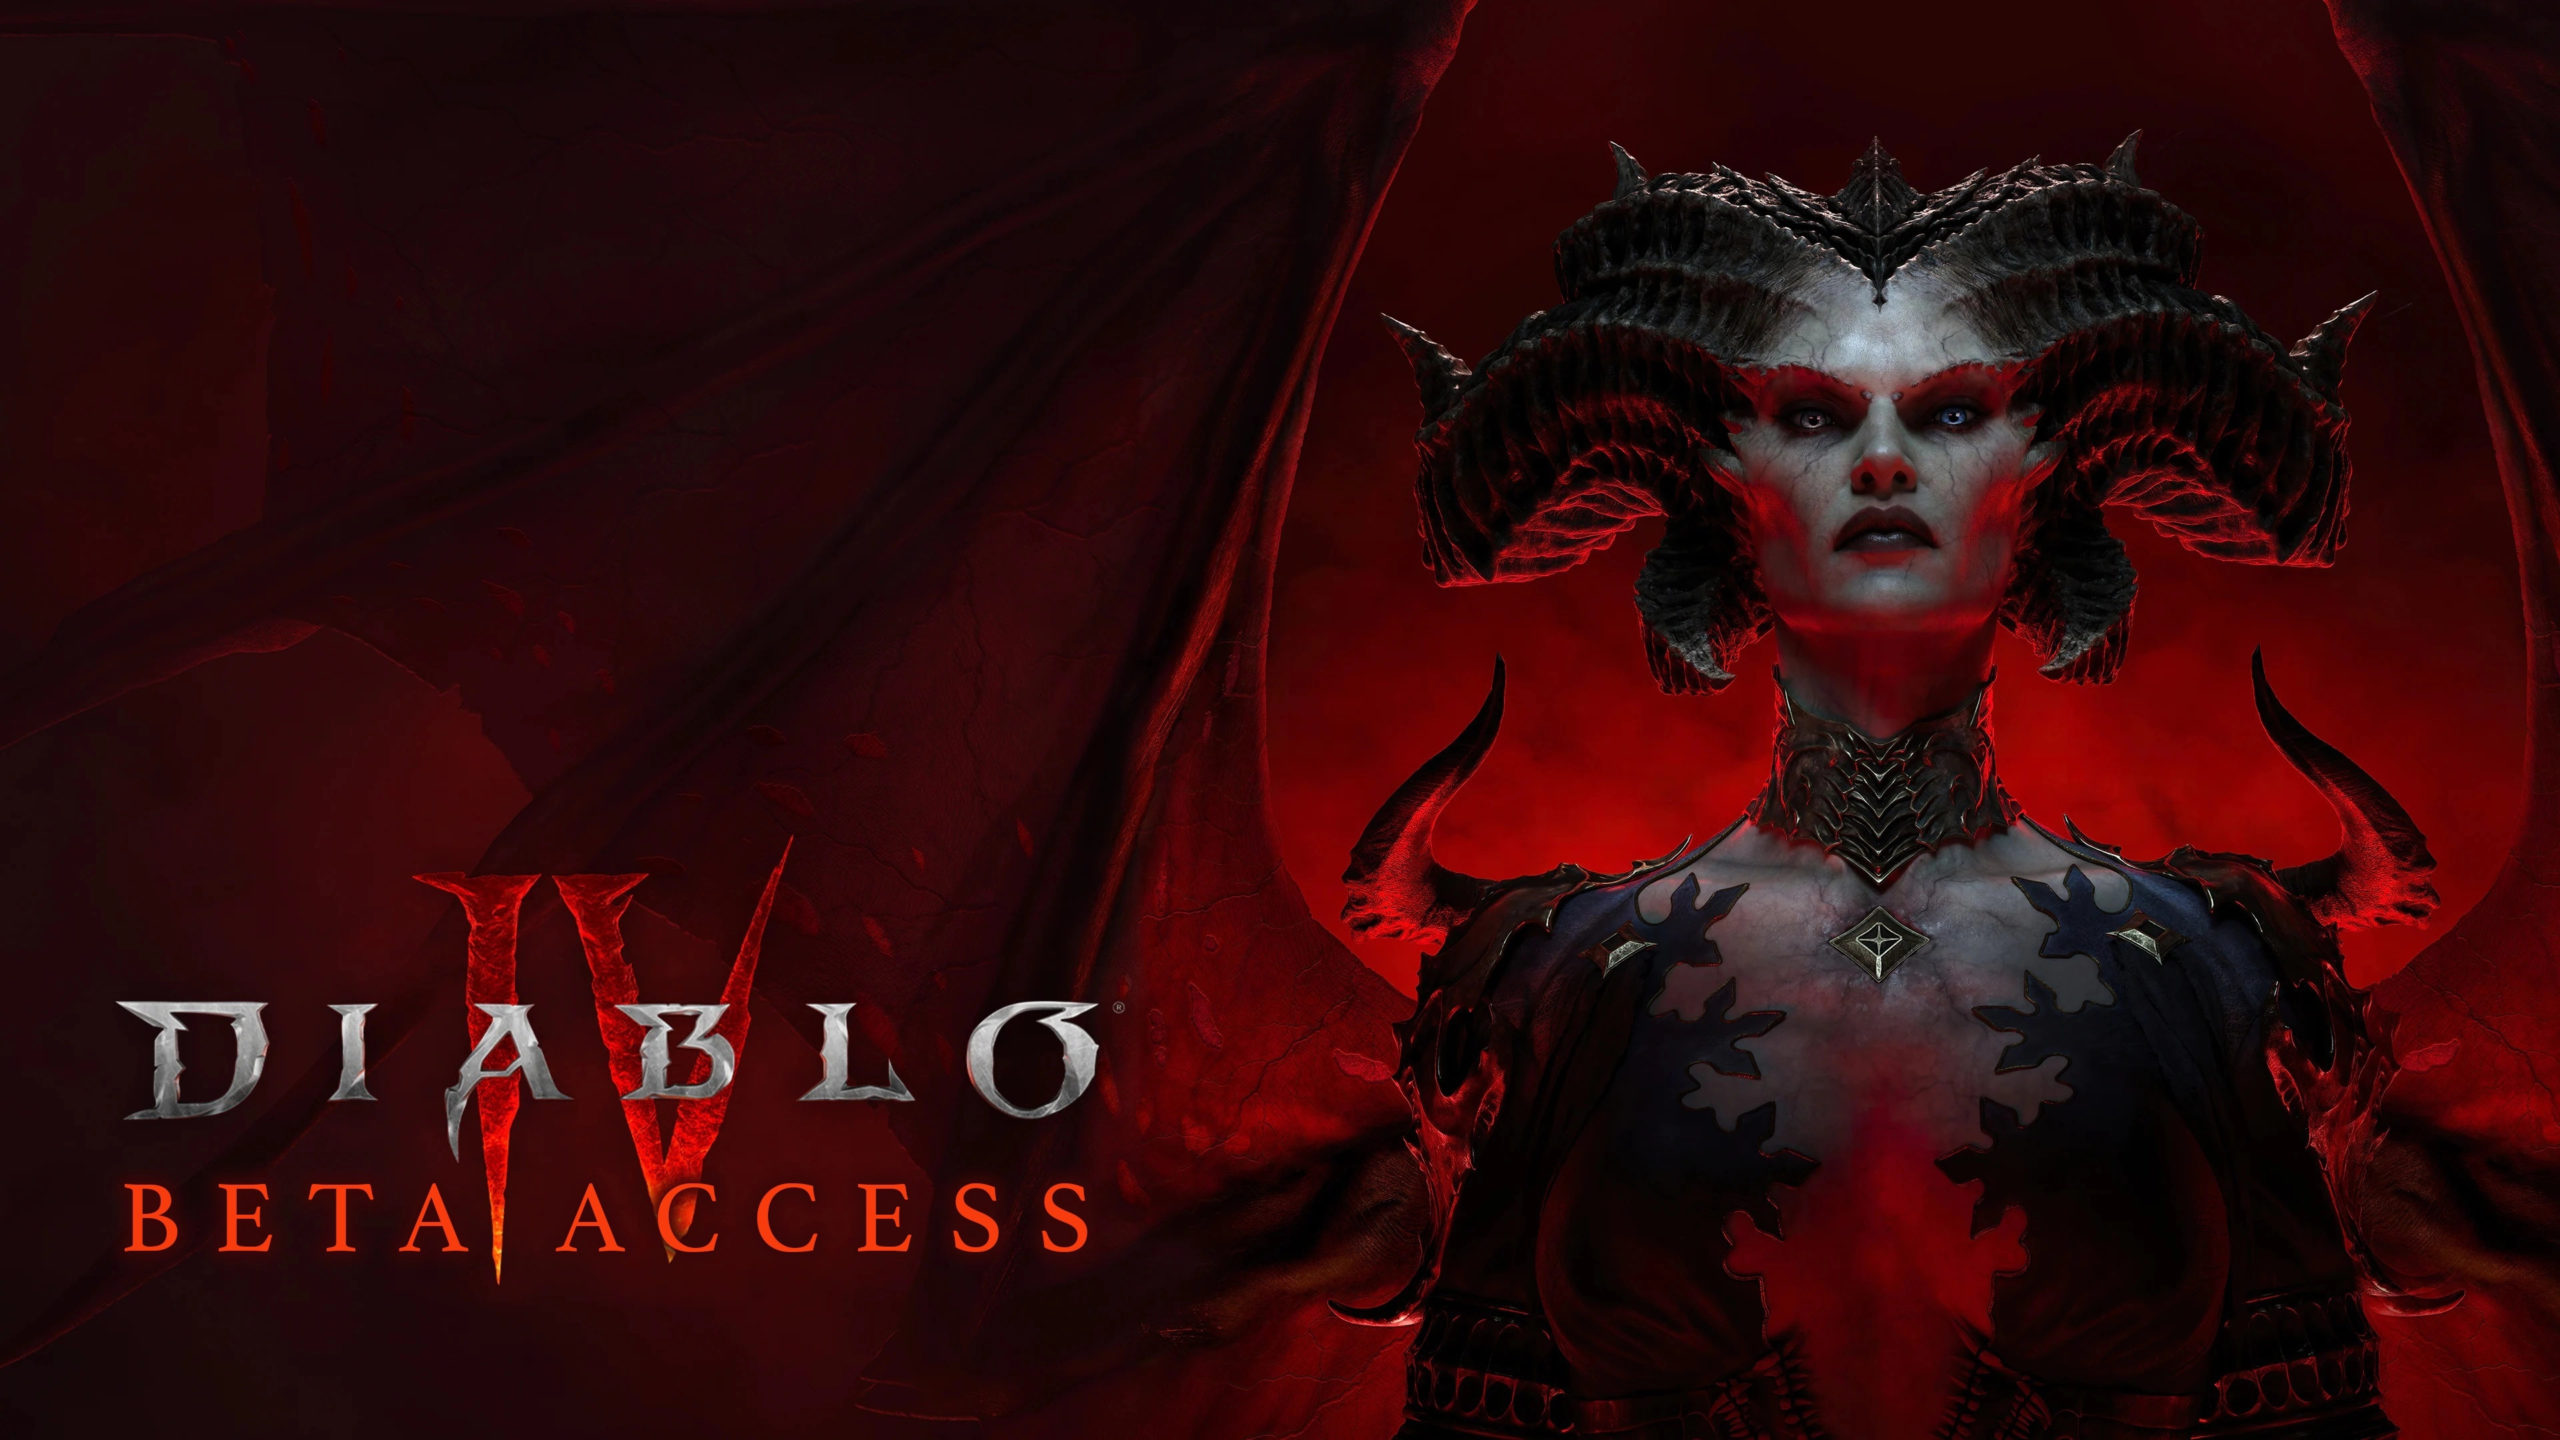 Diablo IV: Servers are saturated due to flood of early beta players

